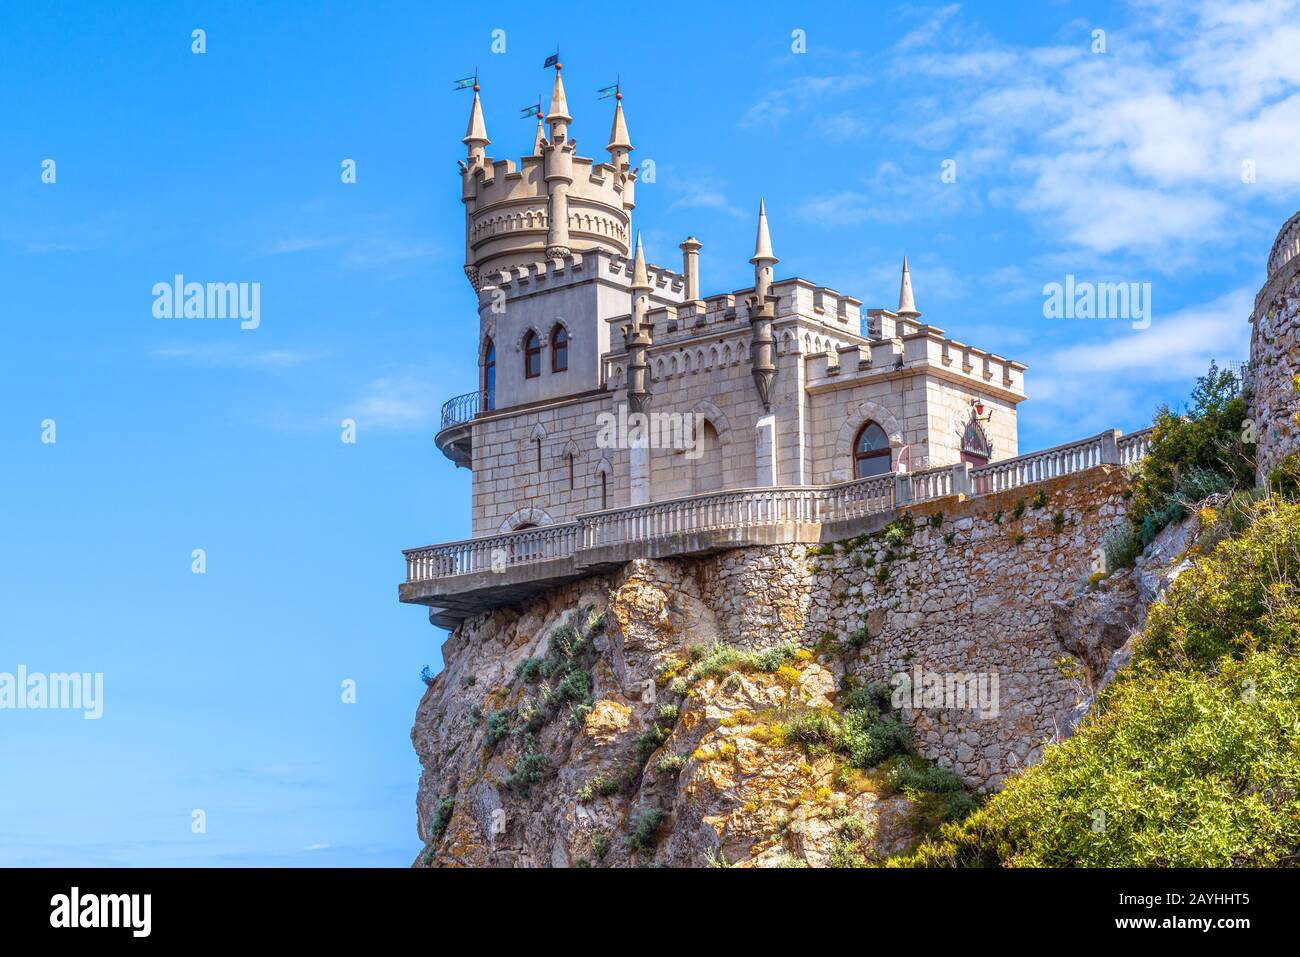 Castle of Swallow's Nest at the Black Sea coast, Crimea, Russia. It is a famous landmark of Crimea. View of Swallow's Nest on rock top against blue sk Stock Photo